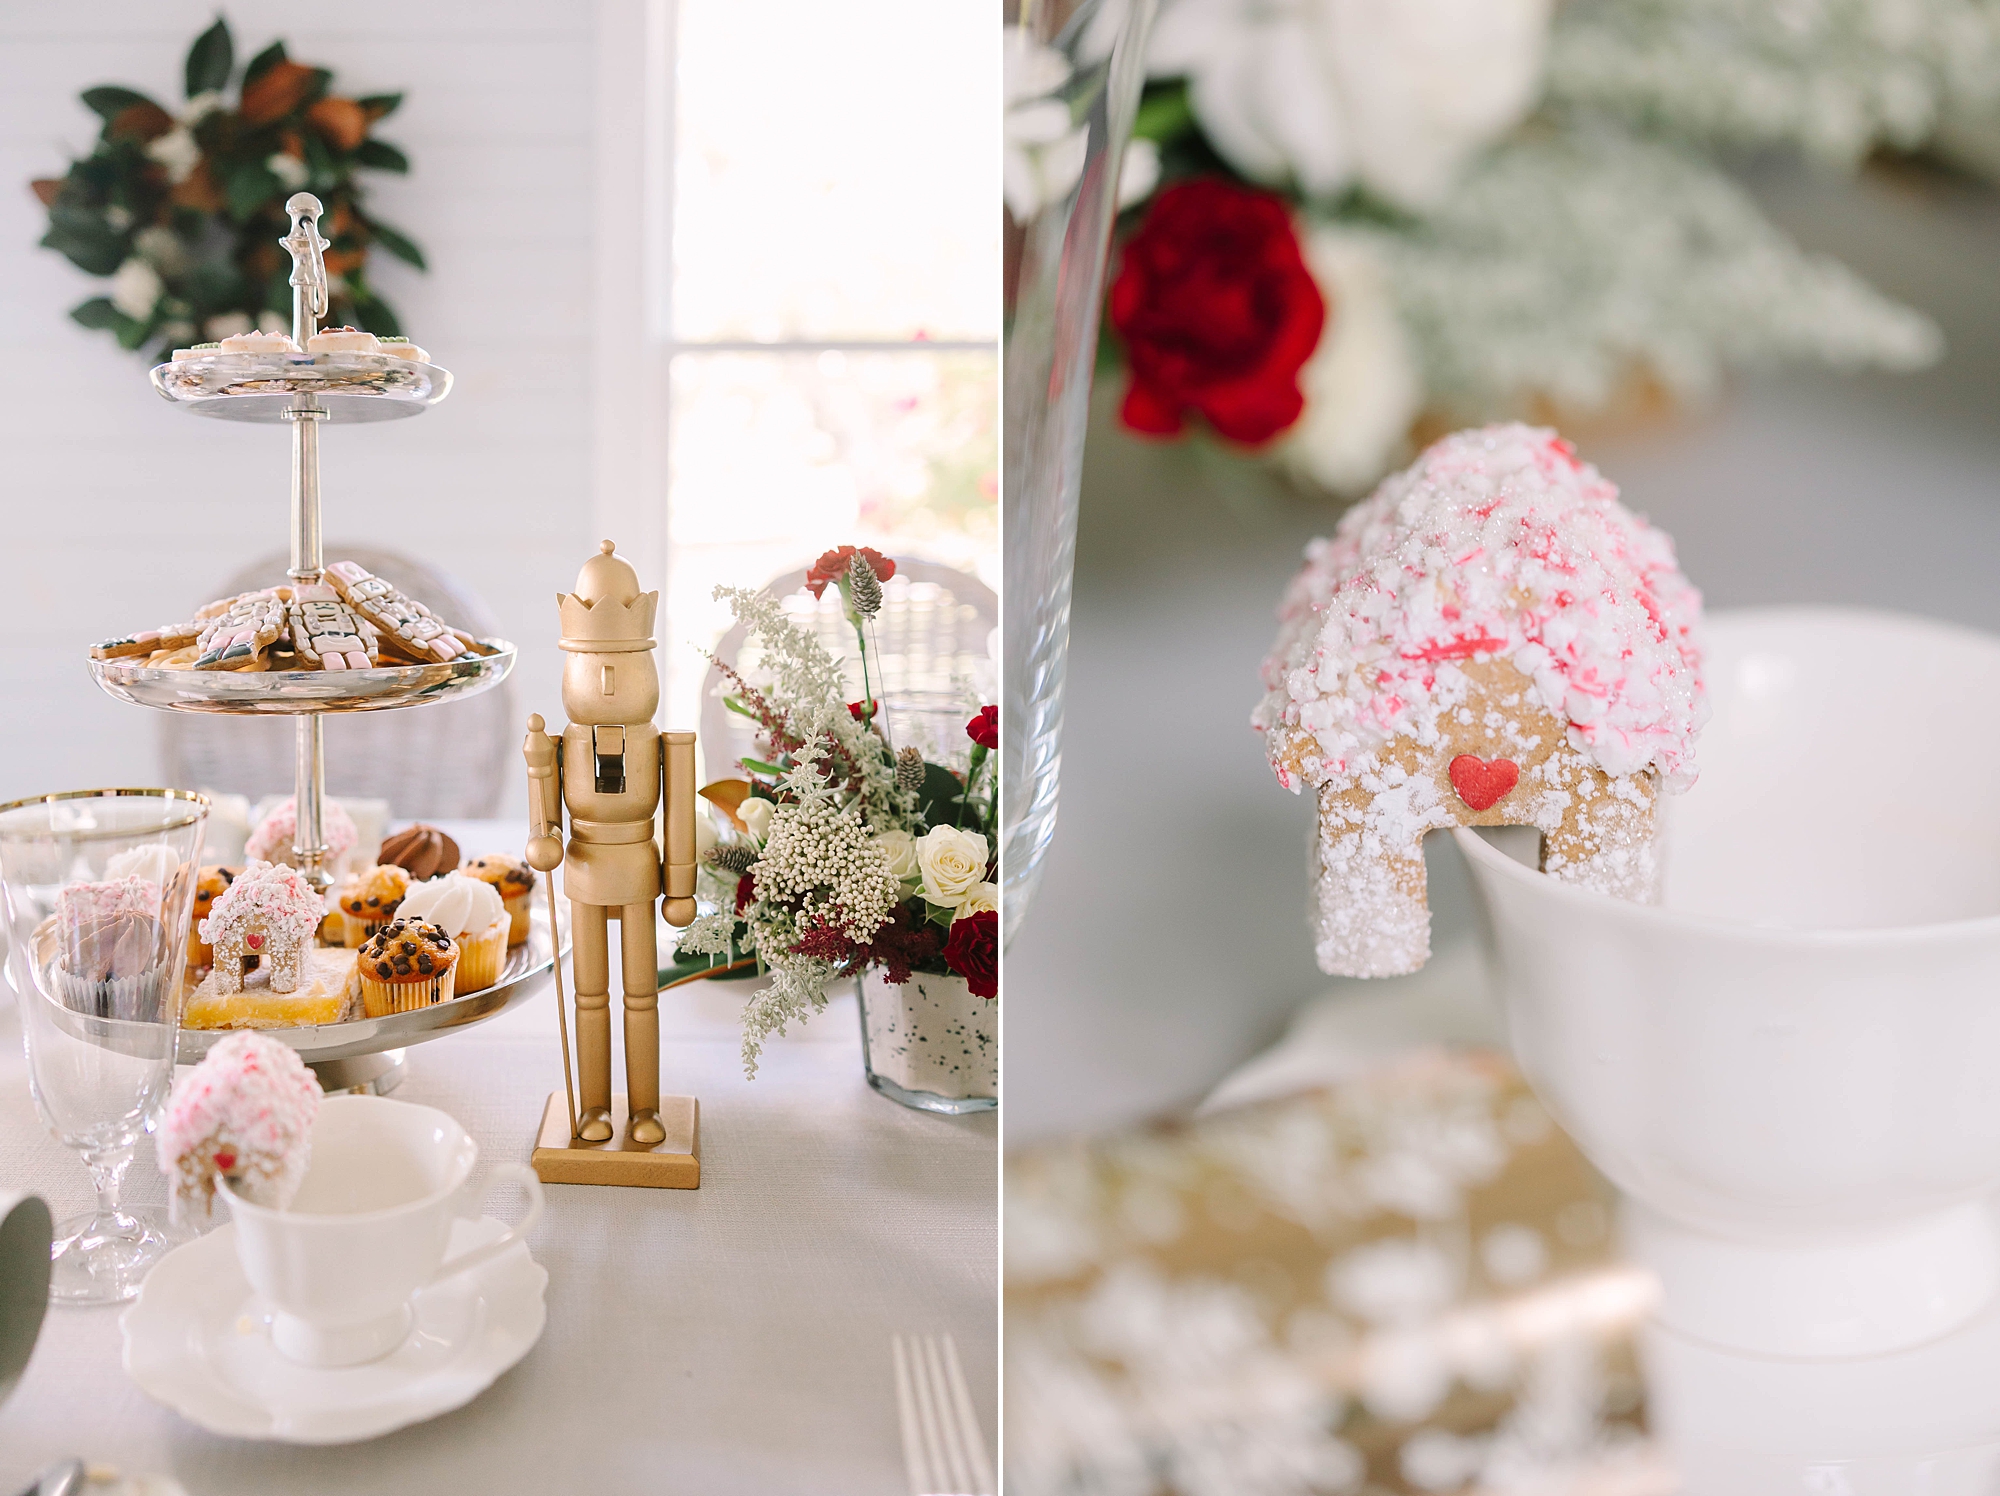 Nutcracker decoration and candied treats for holiday tea party with Pretty Lovely Teas